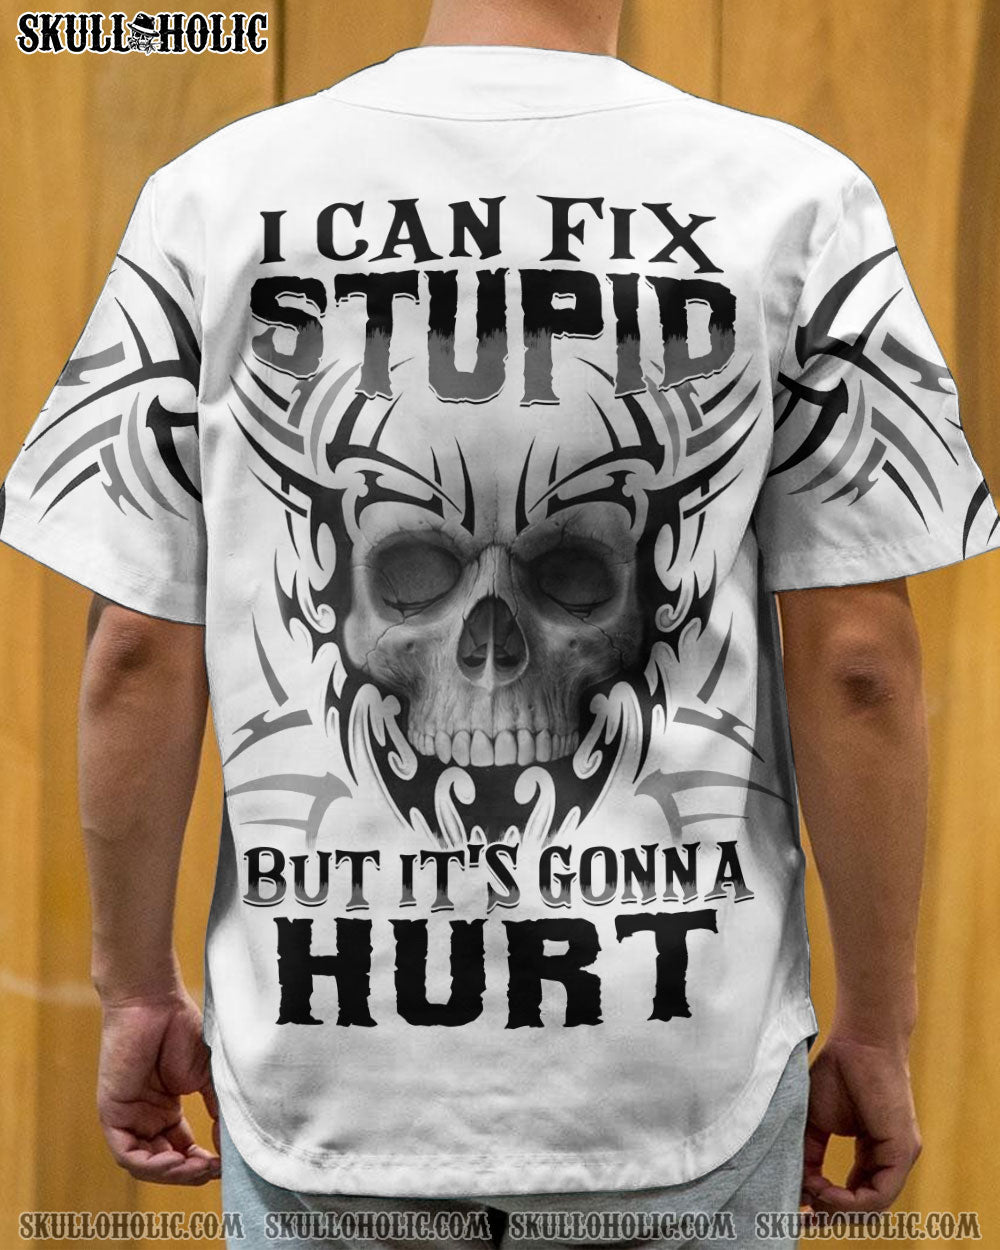 I CAN FIX STUPID BUT IT'S GONNA HURT BASEBALL JERSEY - YHTH1008224